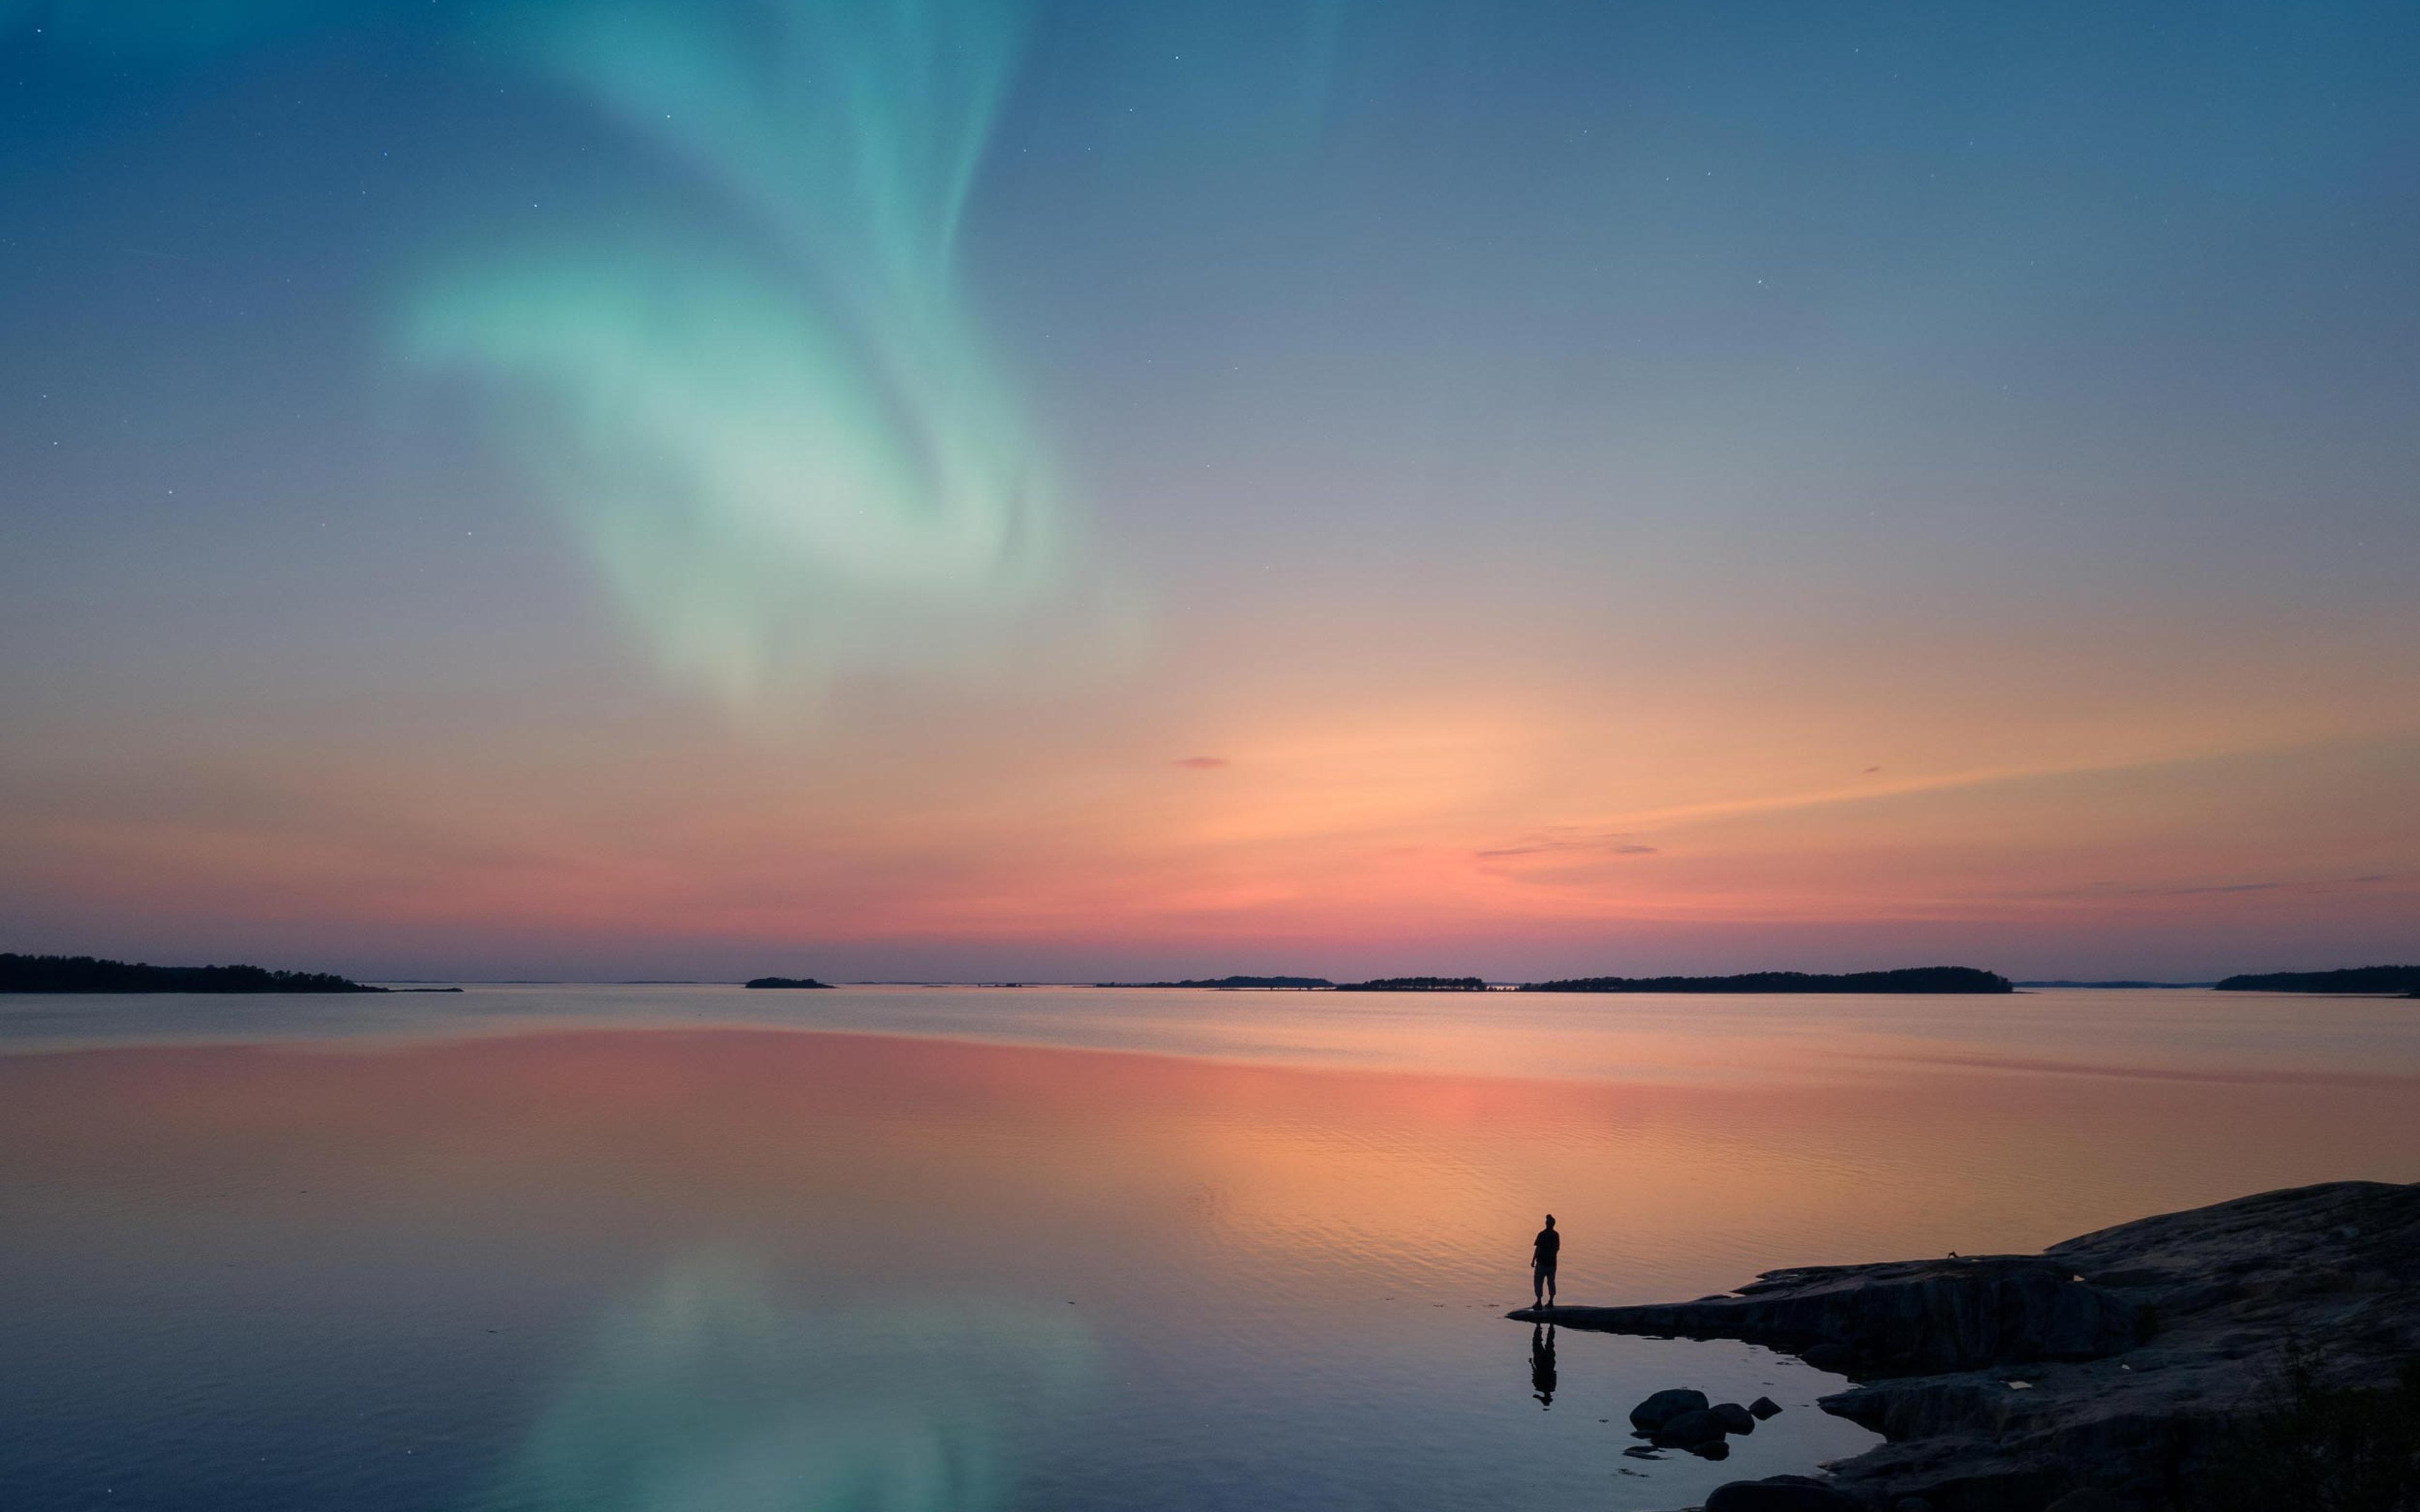 Silhouette of a man standing by a lake shore and looking at a beautiful aurora borealis on the sky with reflections on the calm lake.